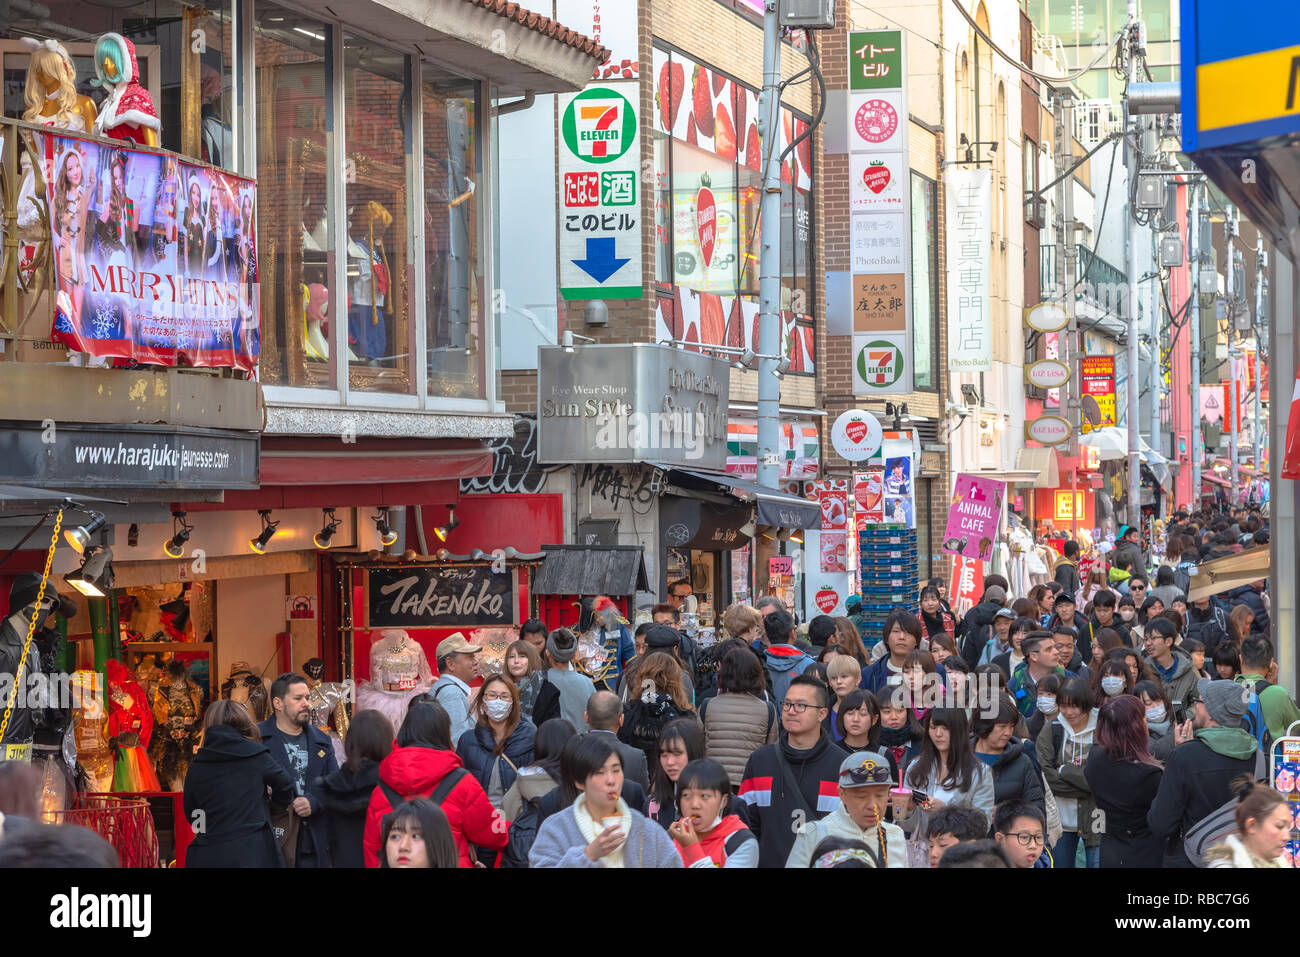 Harajuku street view. People, mostly youngsters, walk through Takeshita Street, a famous shopping street lined with fashion boutiques, cafes and resta Stock Photo